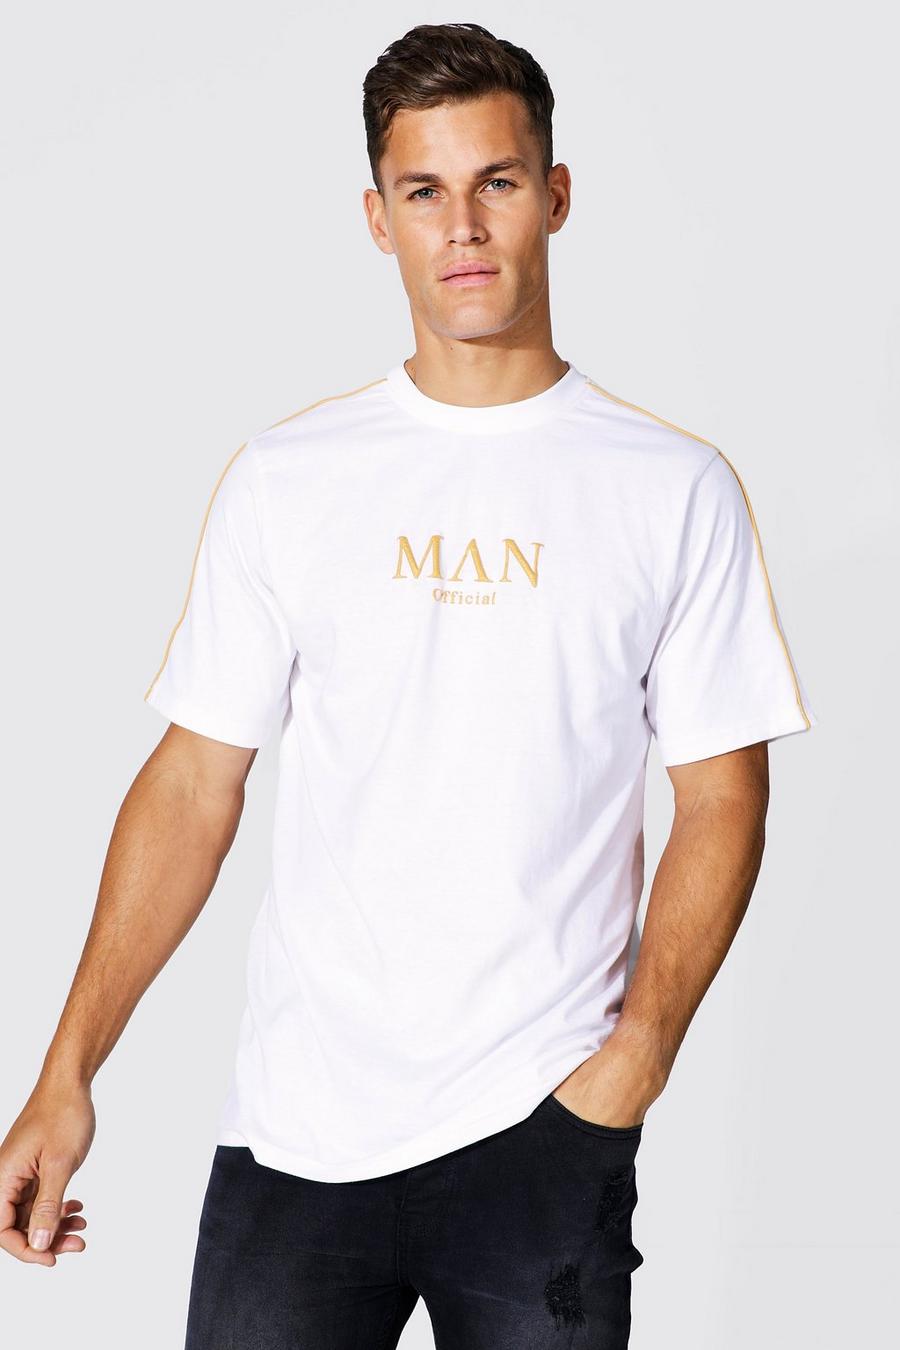 T-shirt Tall Man Gold con cordoncino, White blanco image number 1